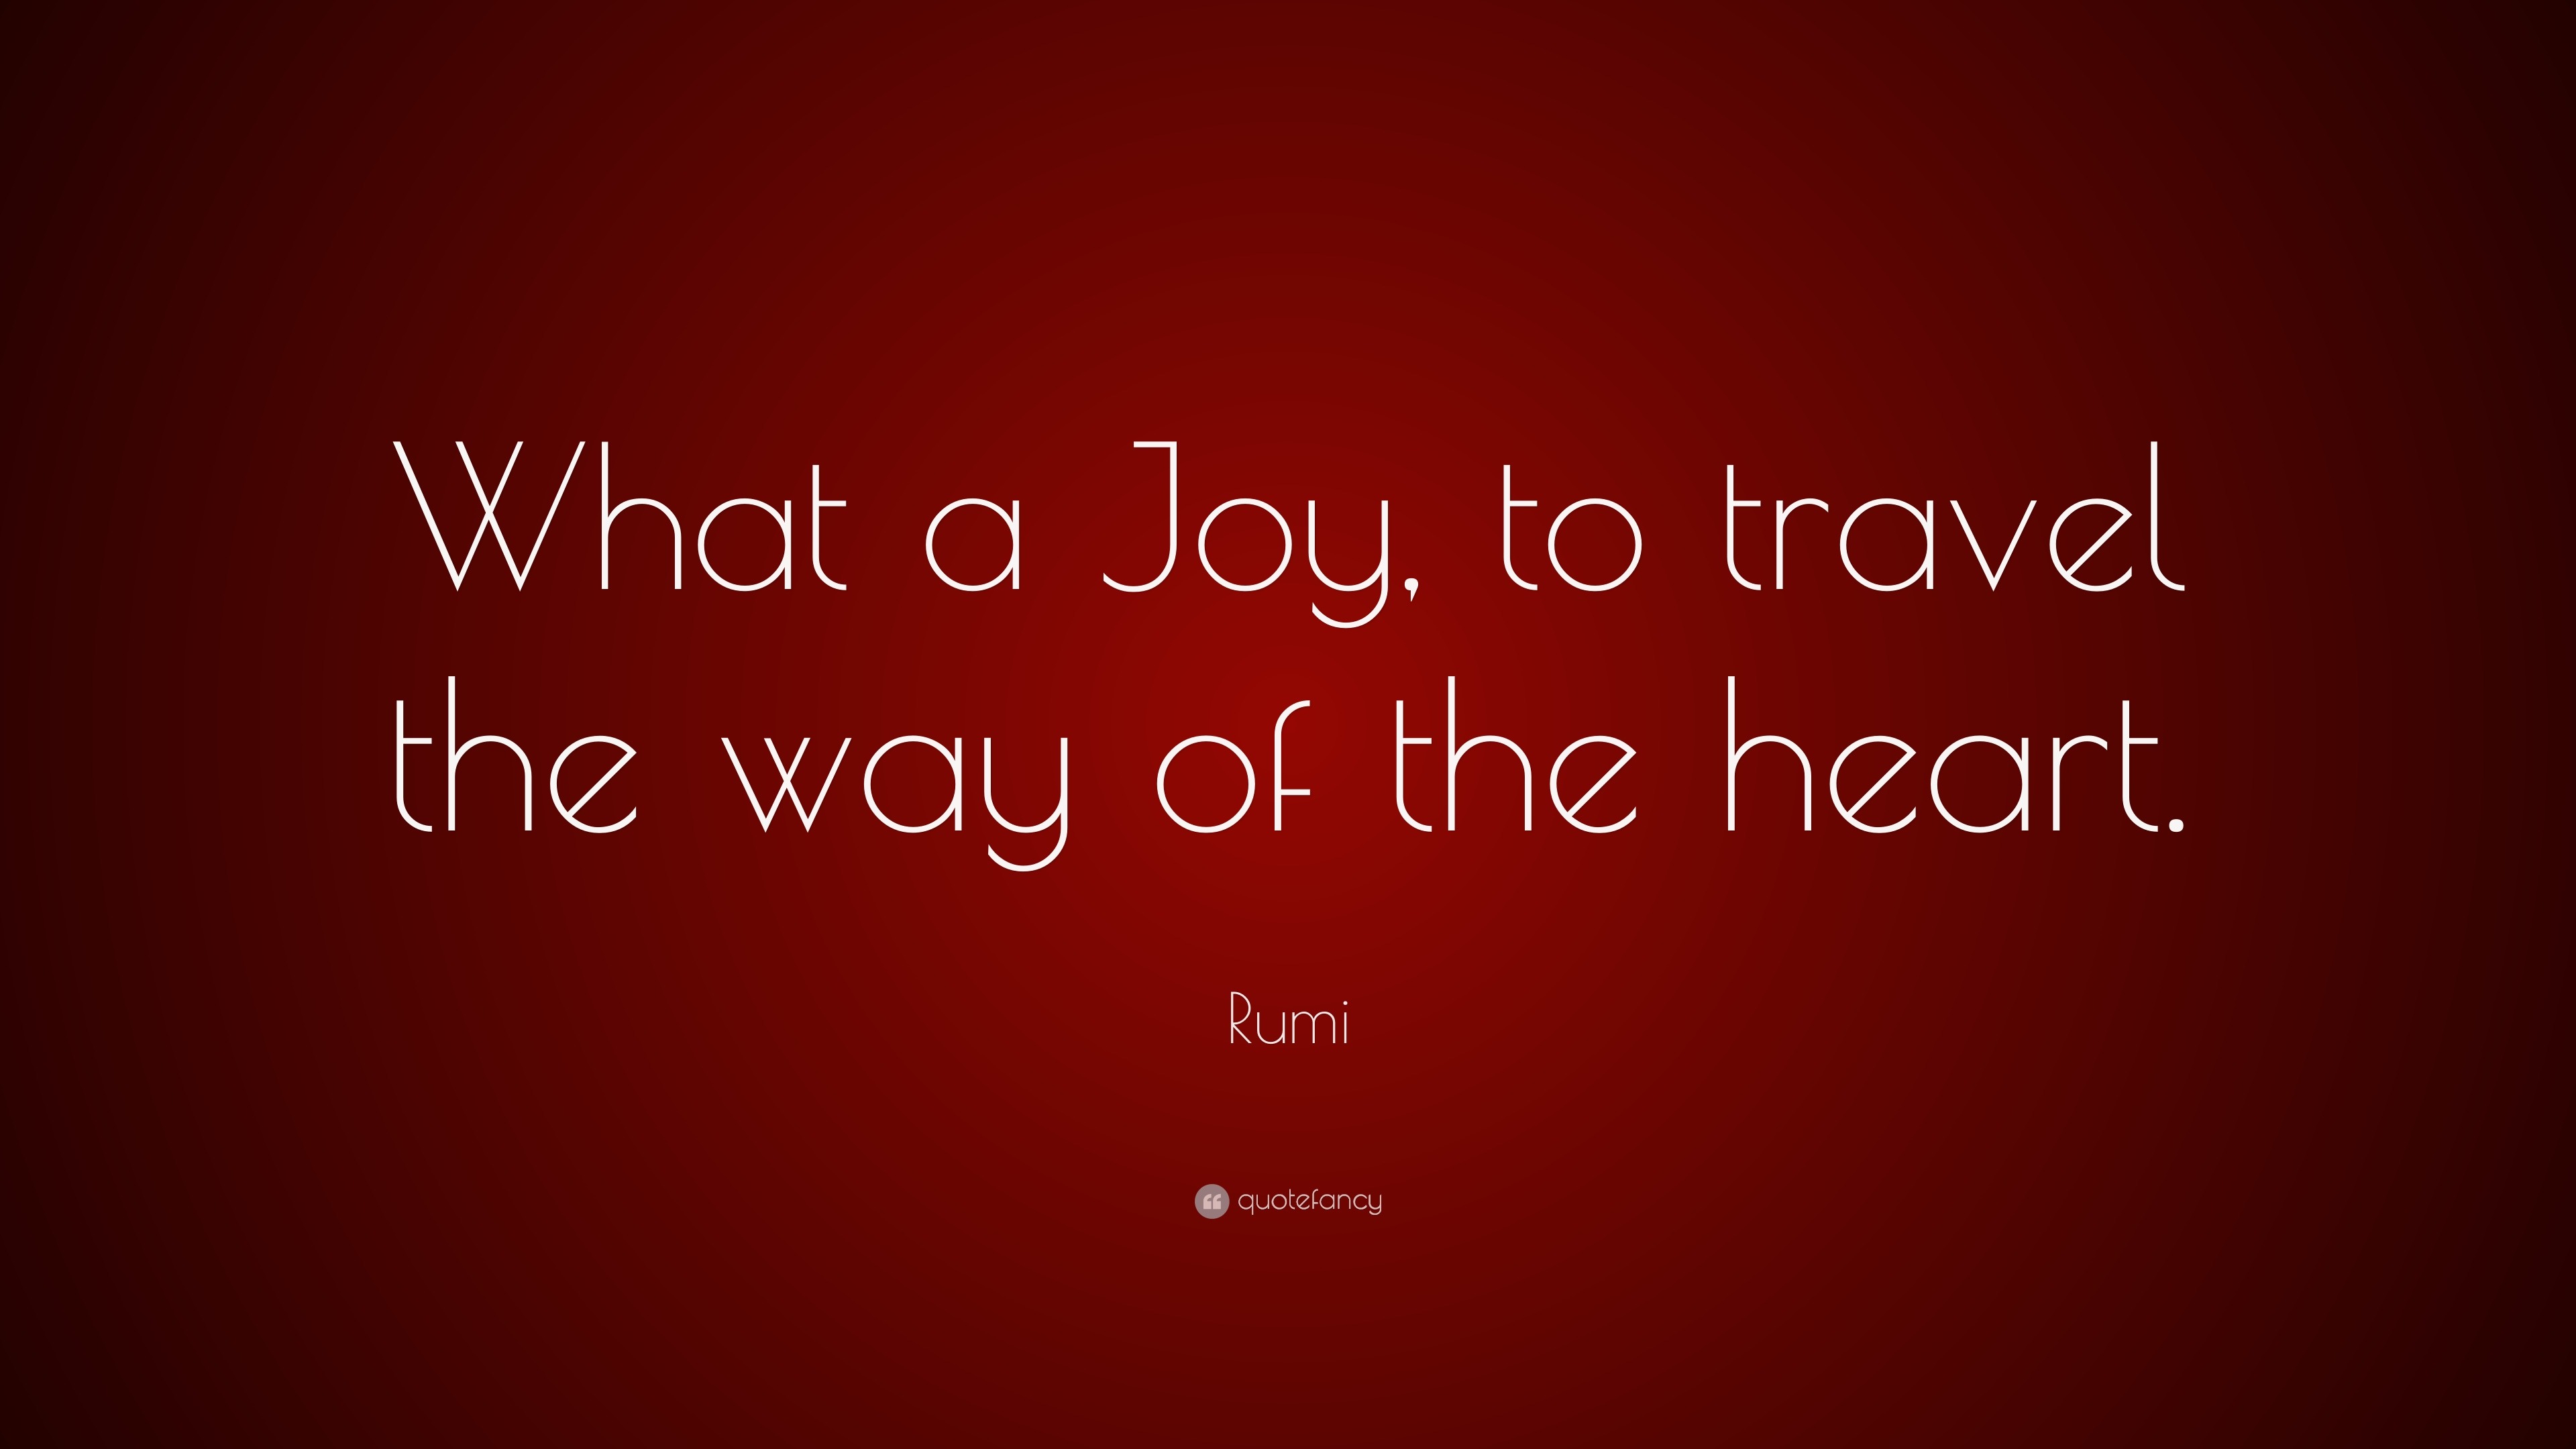 Rumi Quote: “What a Joy, to travel the way of the heart.”